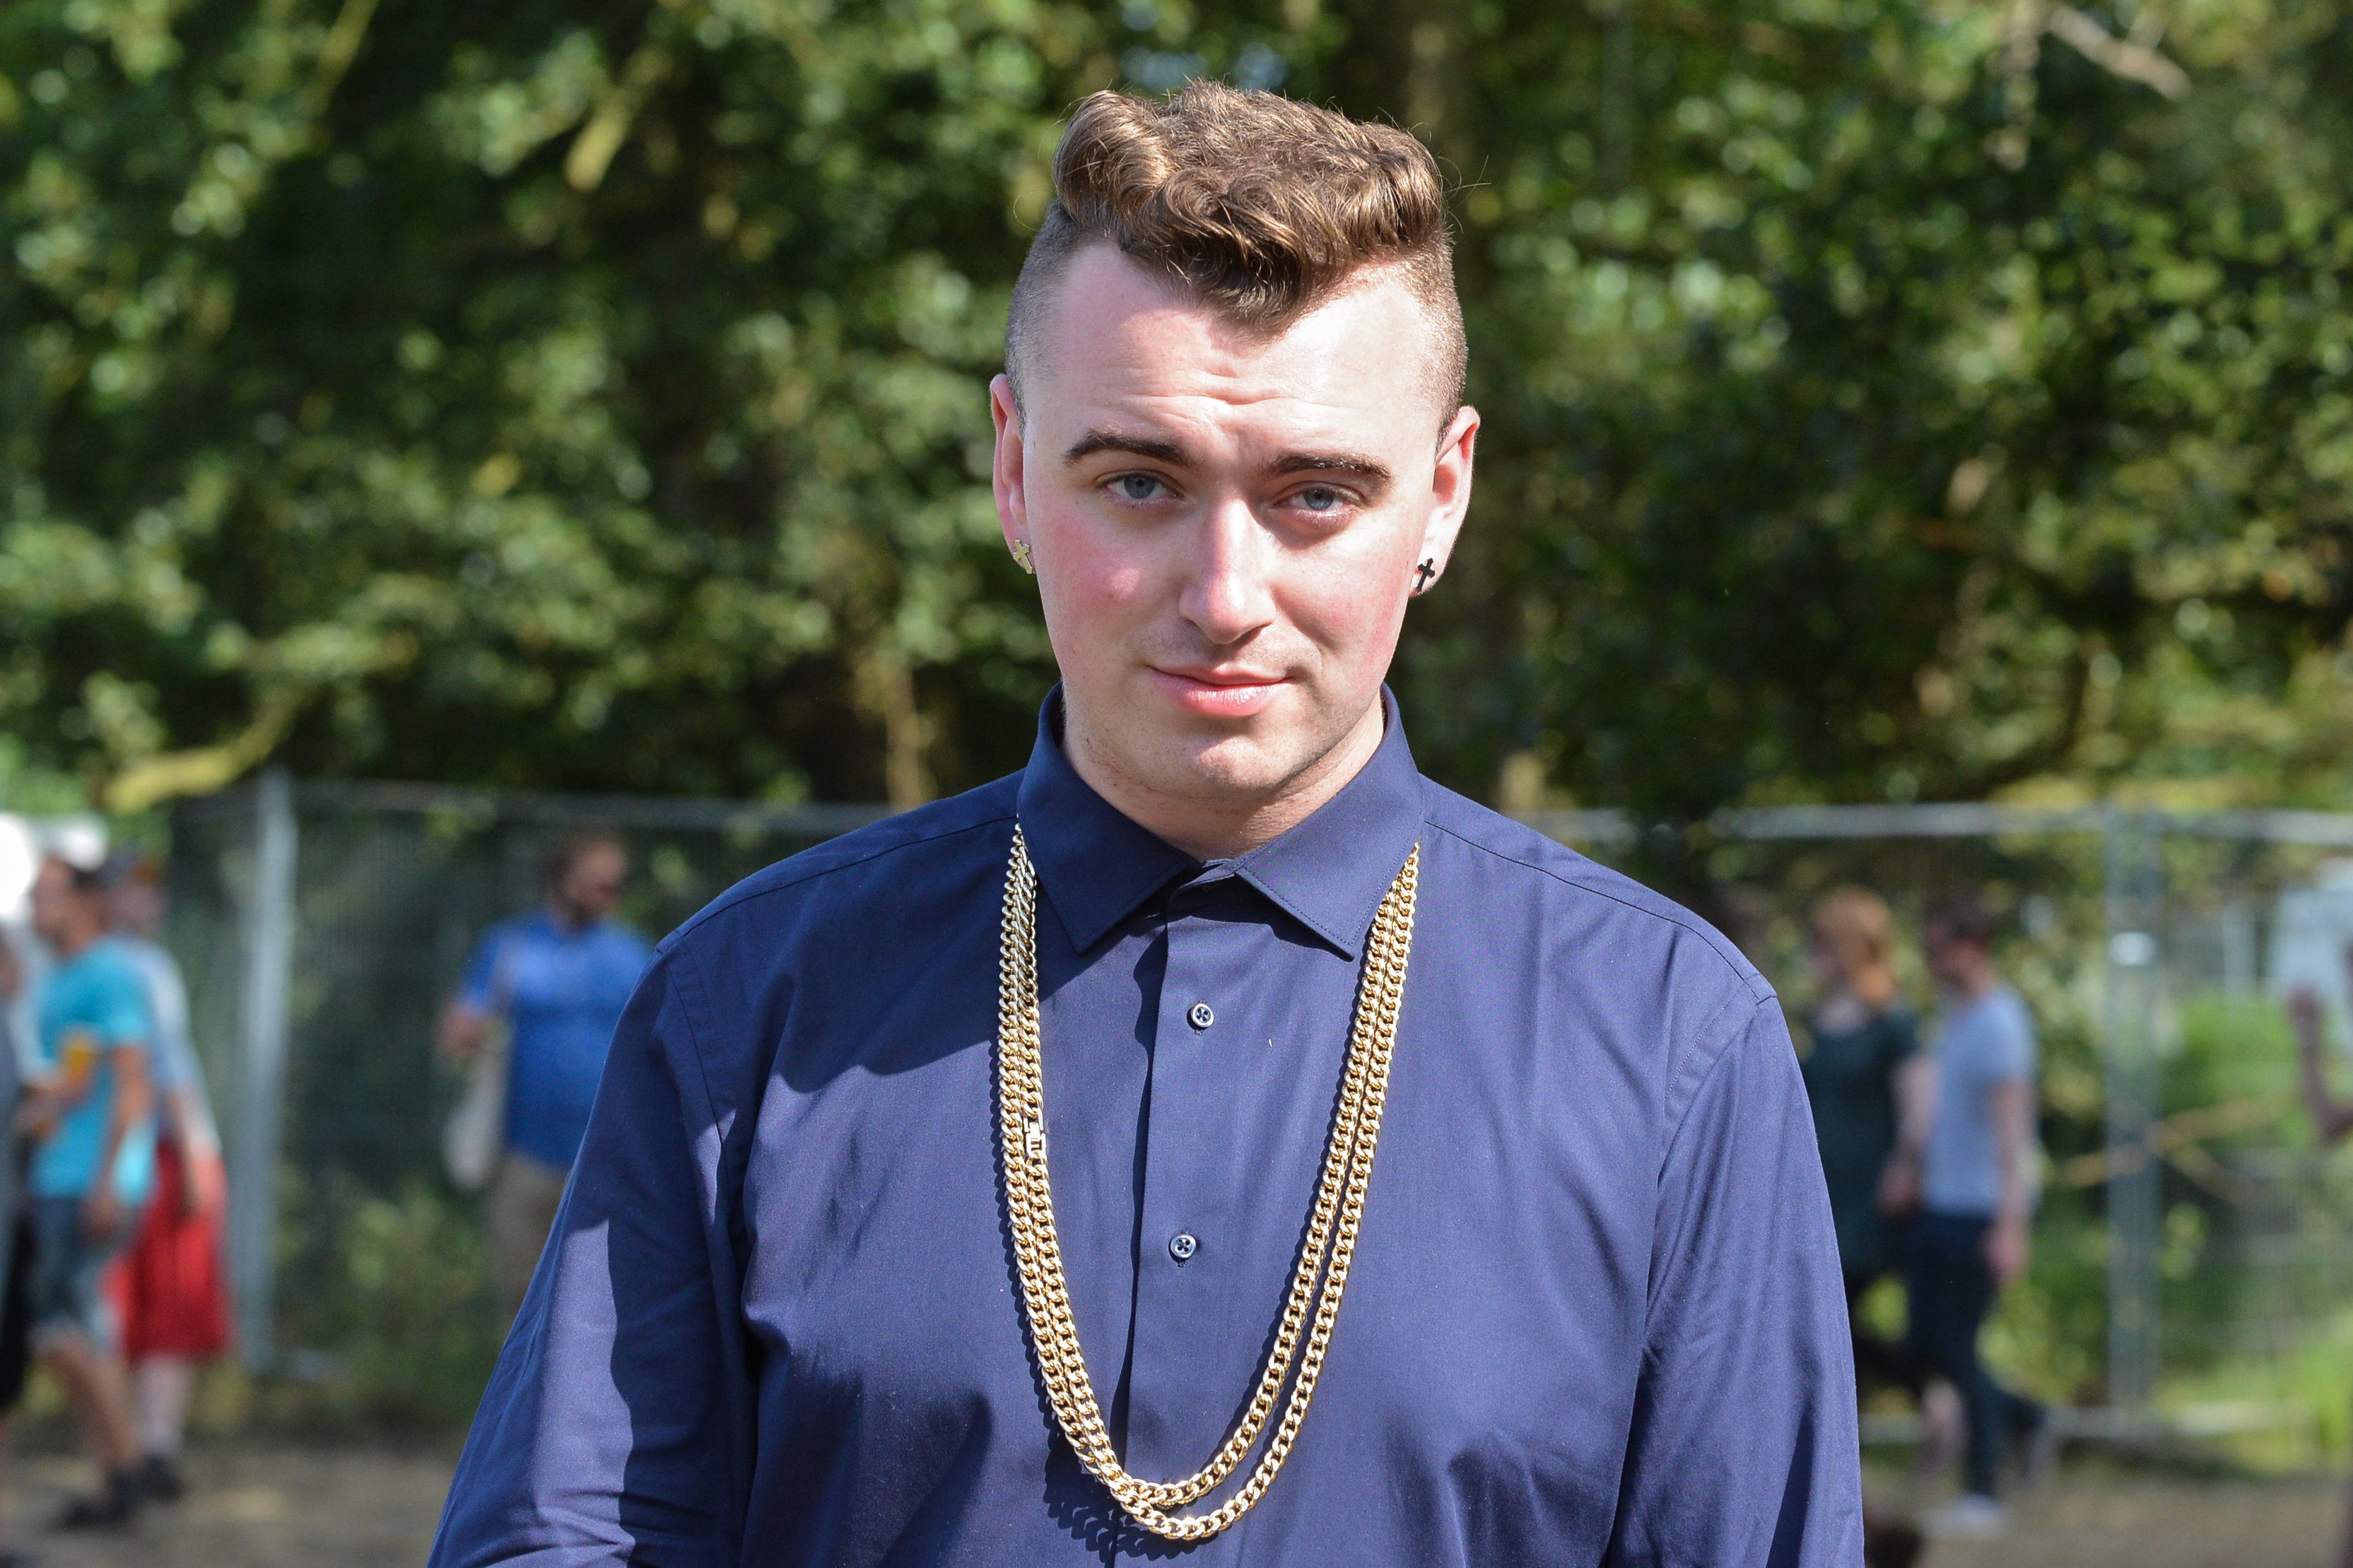 Sam Smith posed backstage on Day 4 of Latitude Festival 2013 at Henham Park Estate on July 21, 2013, in Southwold, England. | Source: Getty Images